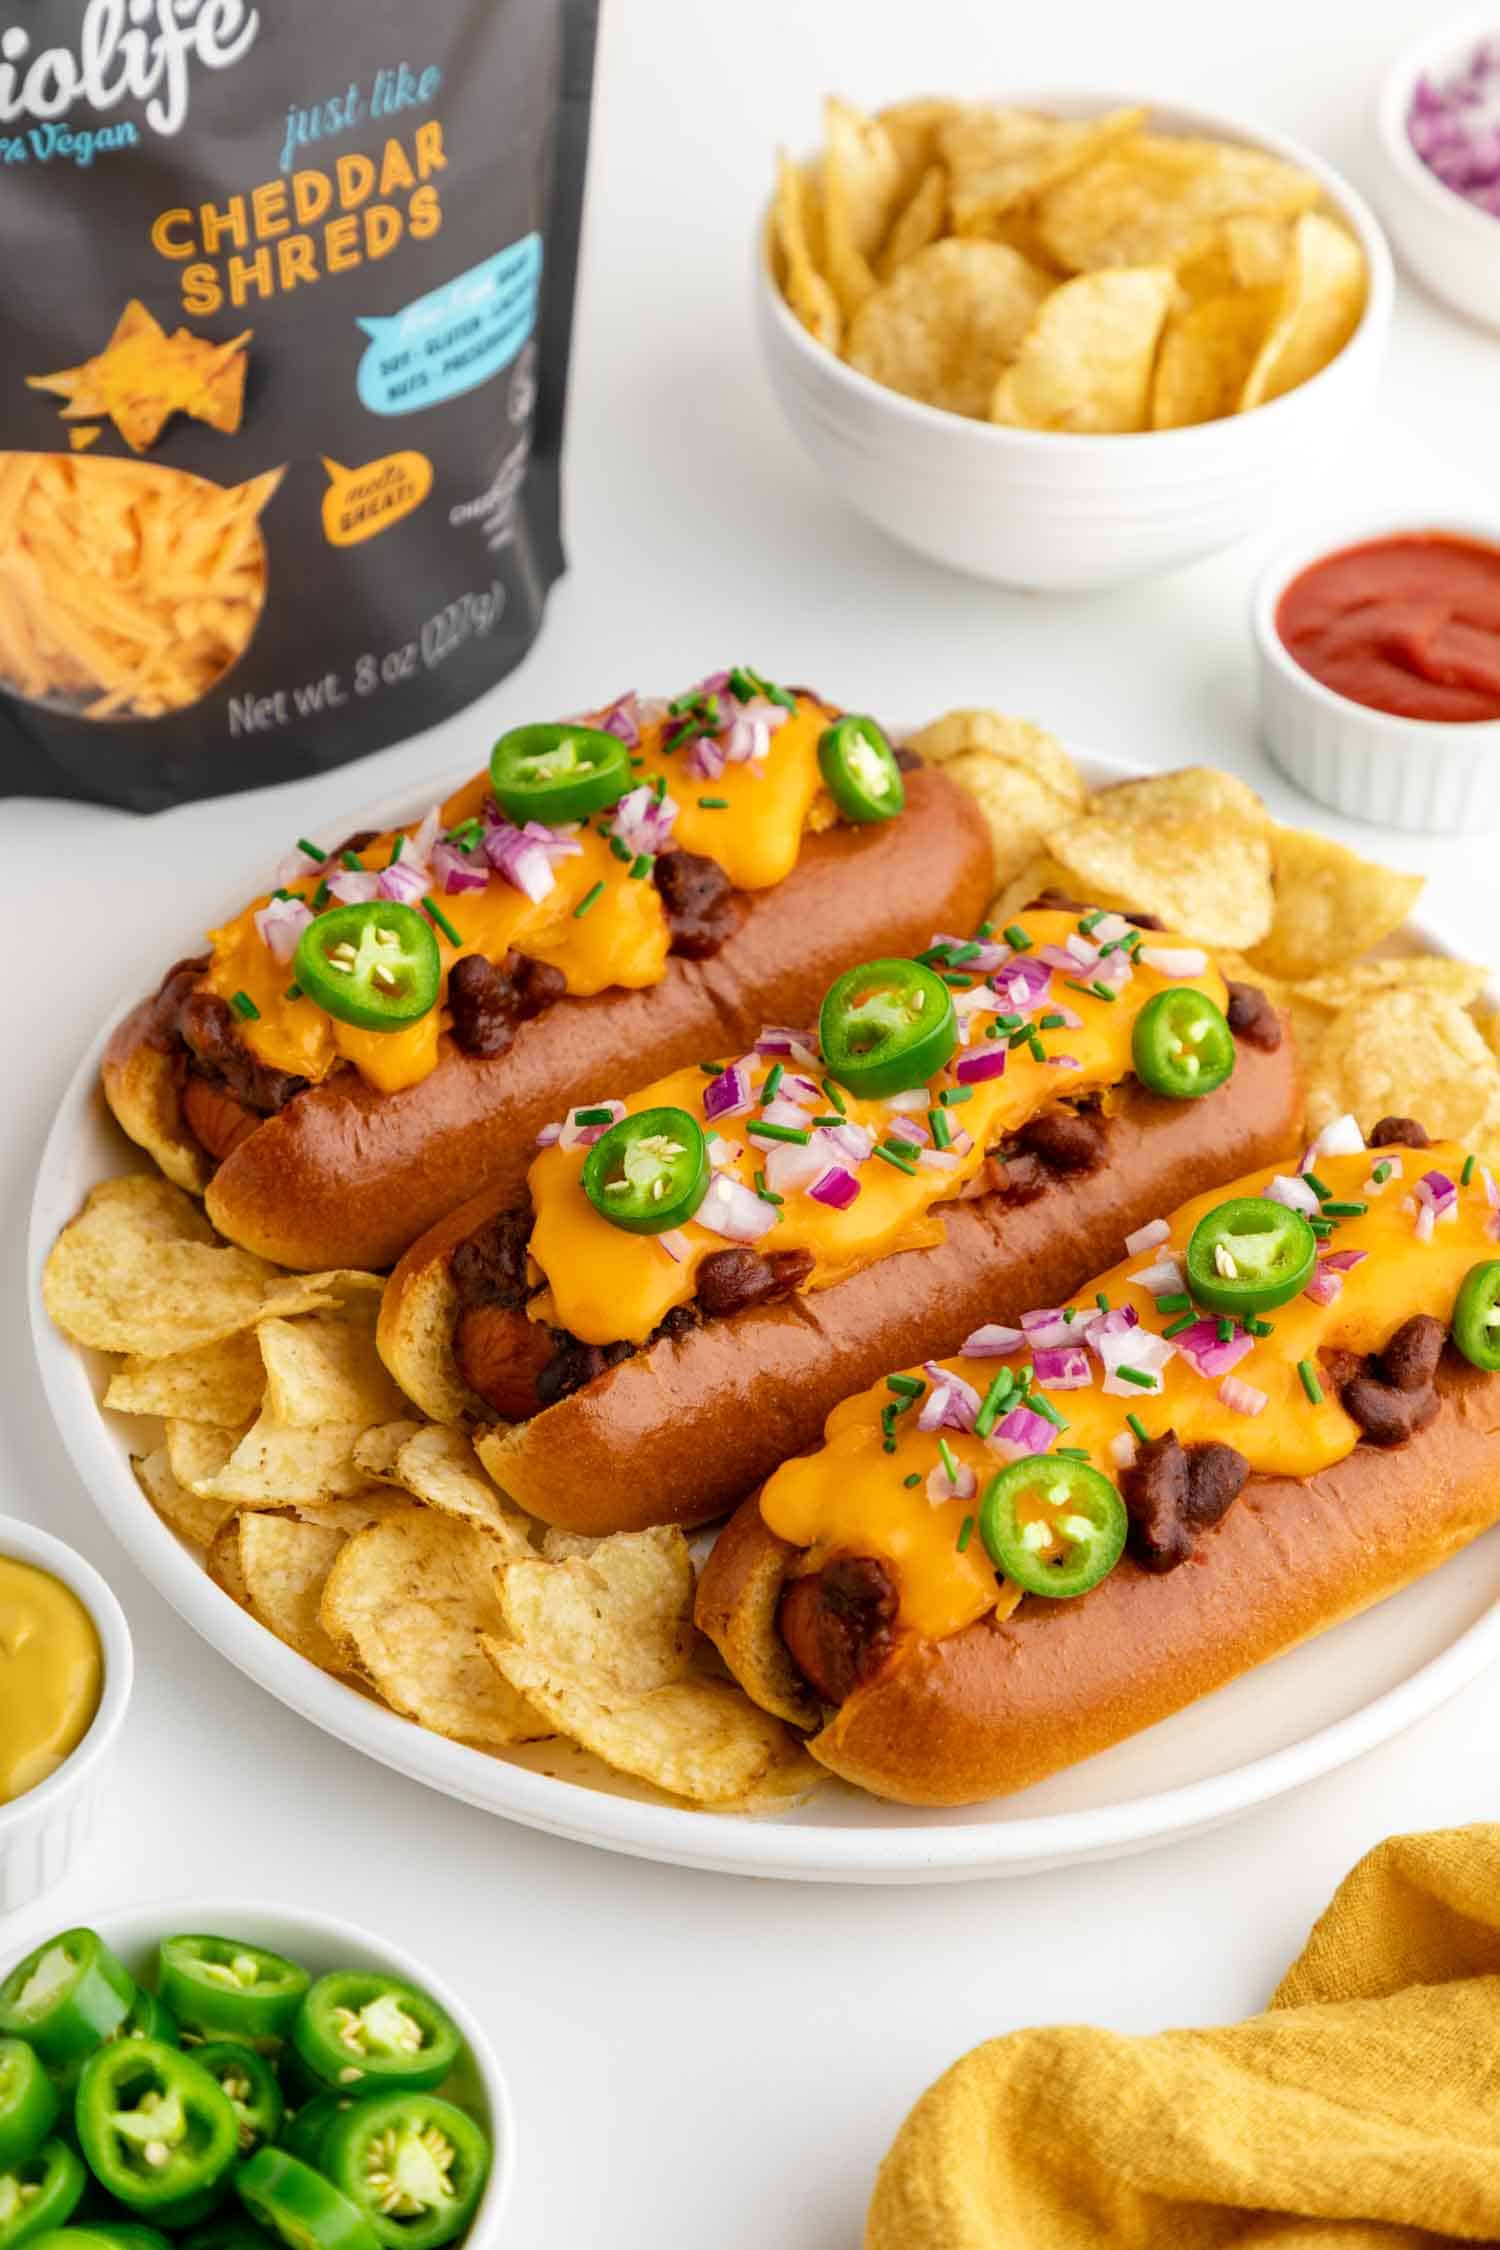 vegan party foods chili cheese dogs